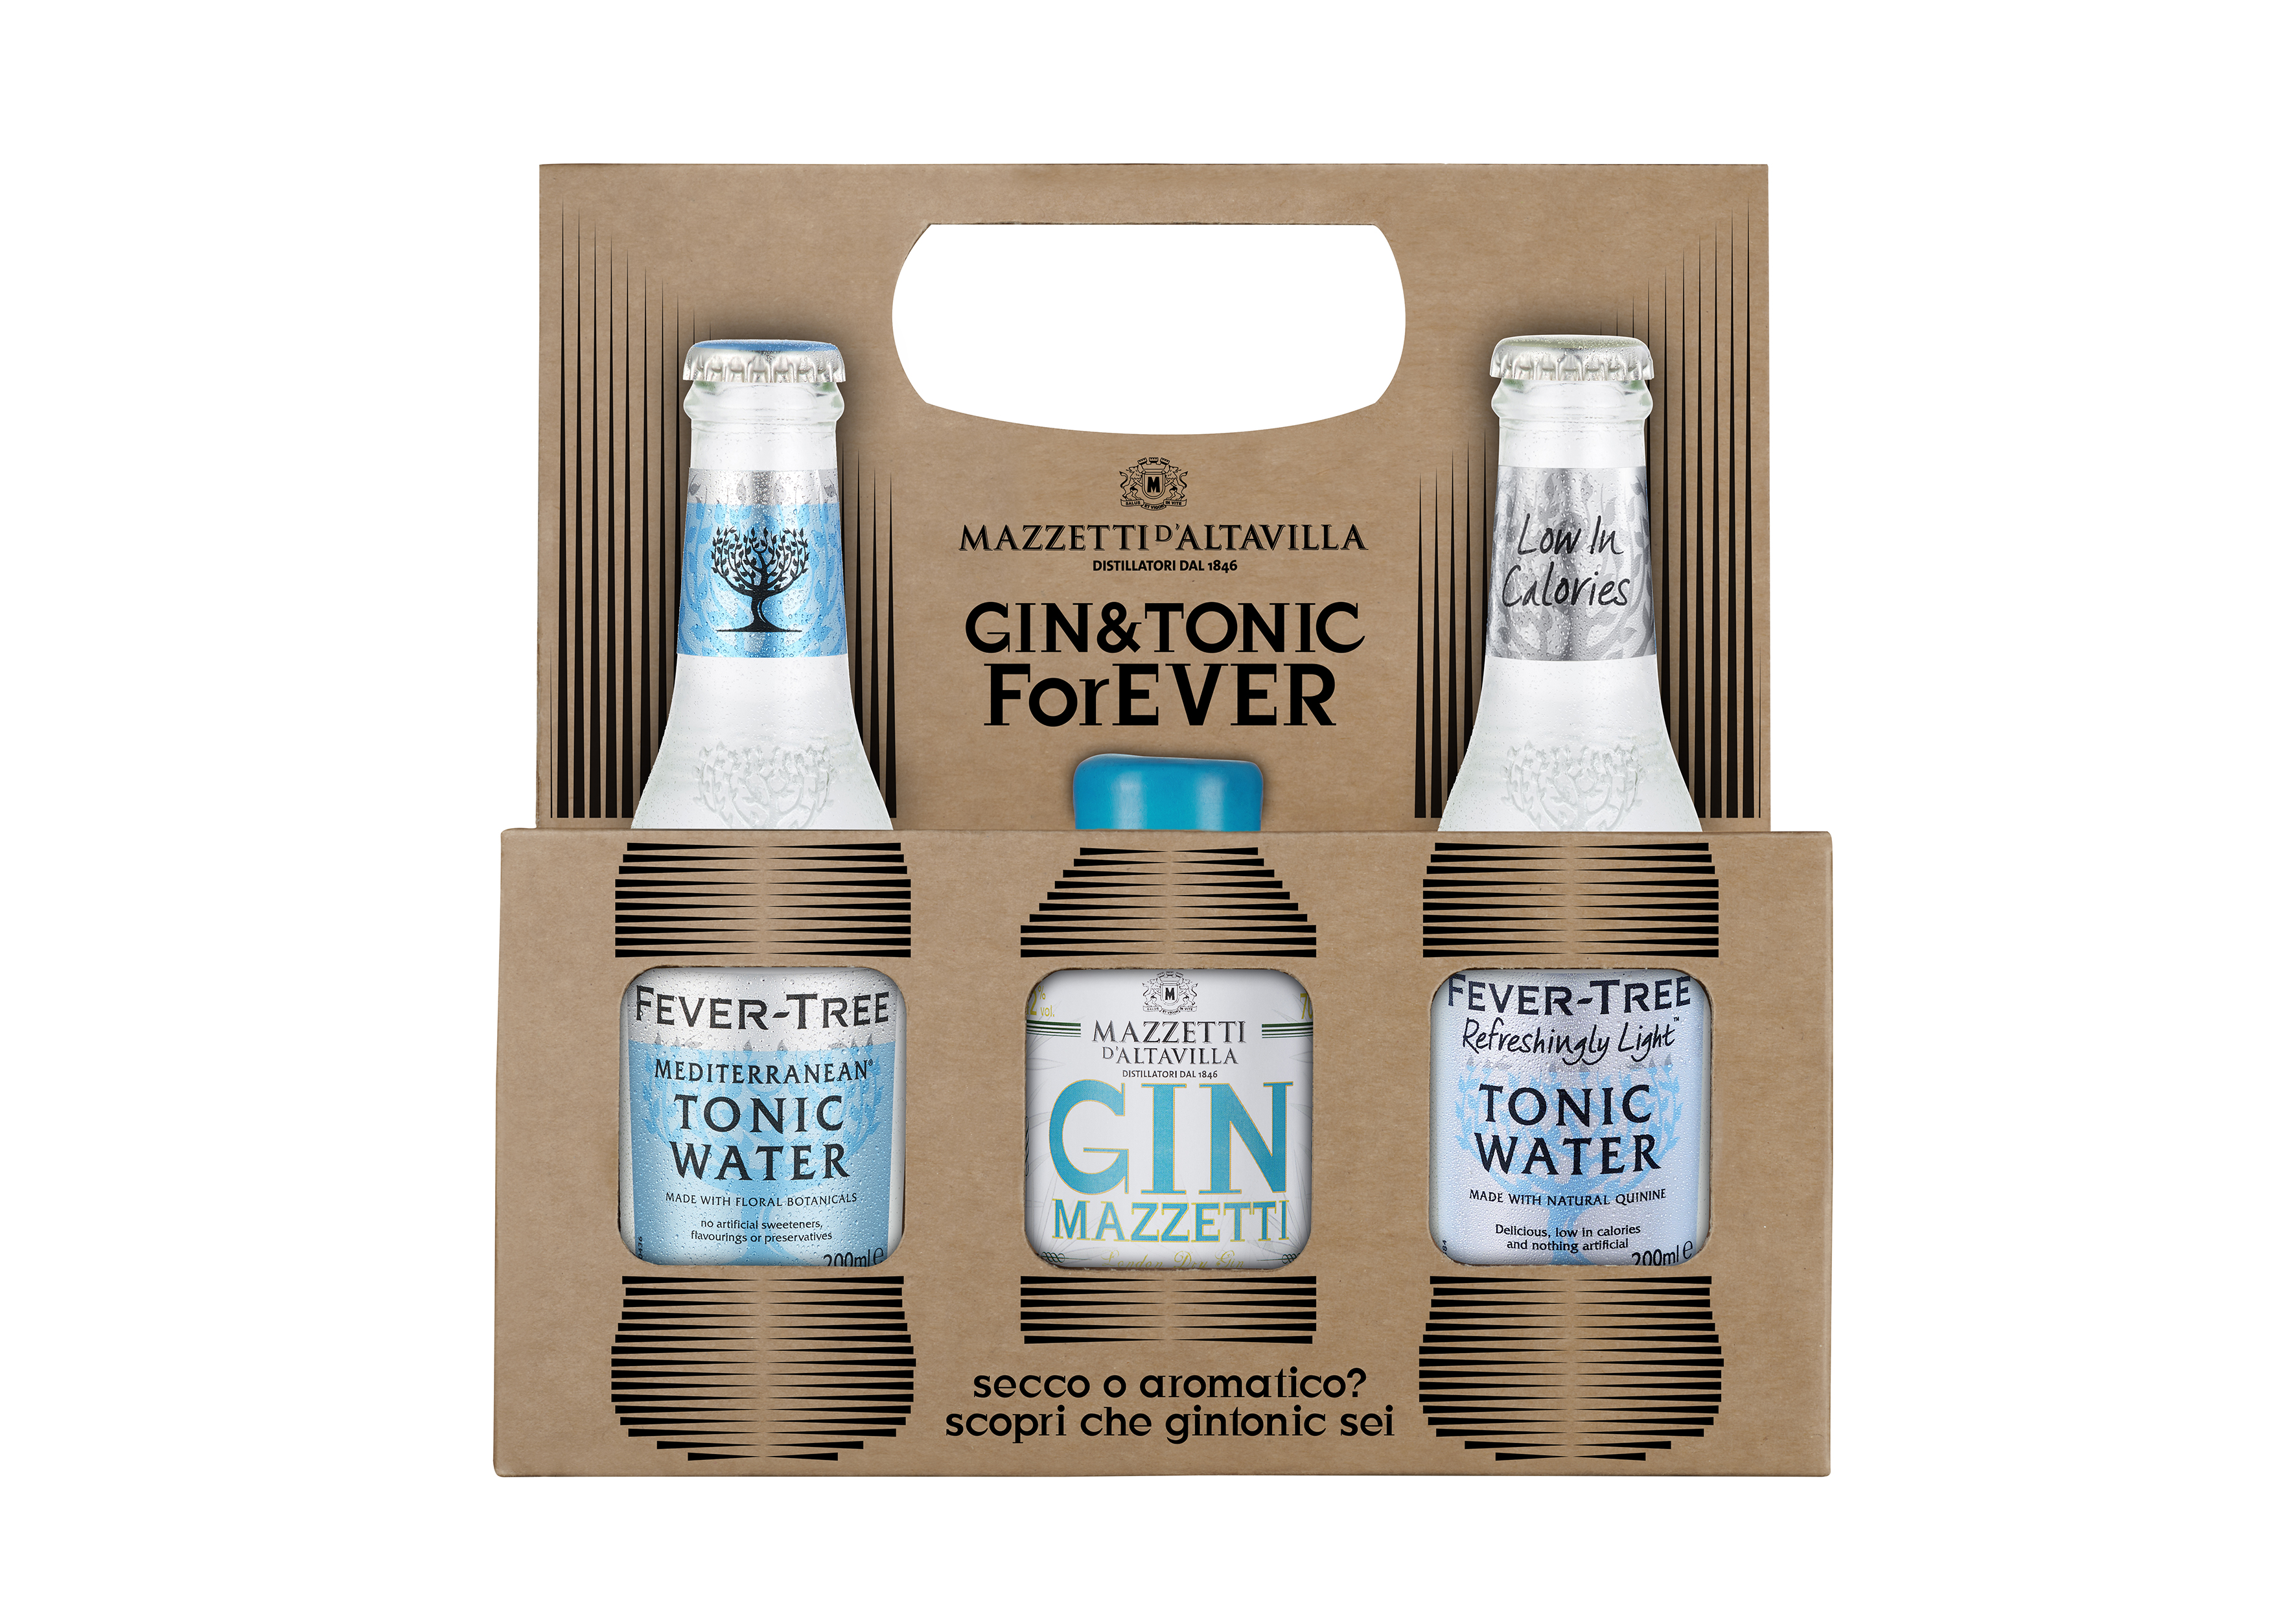 GIN & TONIC F(or)EVER - GIN MAZZETTI 42% 10 cl con TONIC WATER NATURALLY LIGHT e TONIC WATER MEDITERRANEAN – FEVER-TREE 20 cl